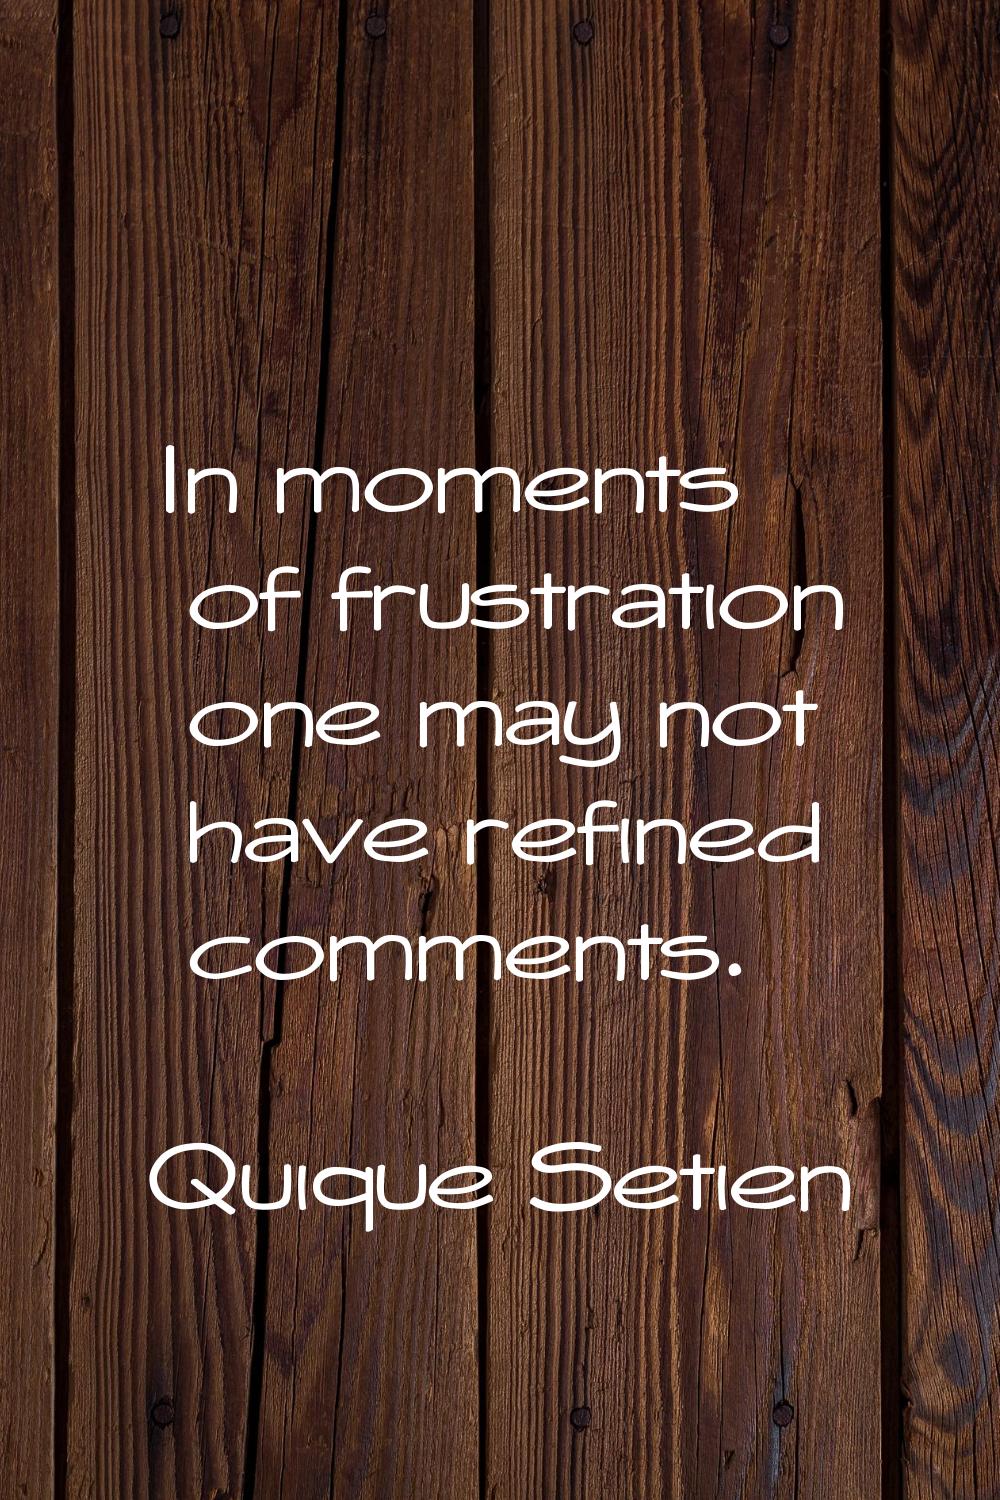 In moments of frustration one may not have refined comments.